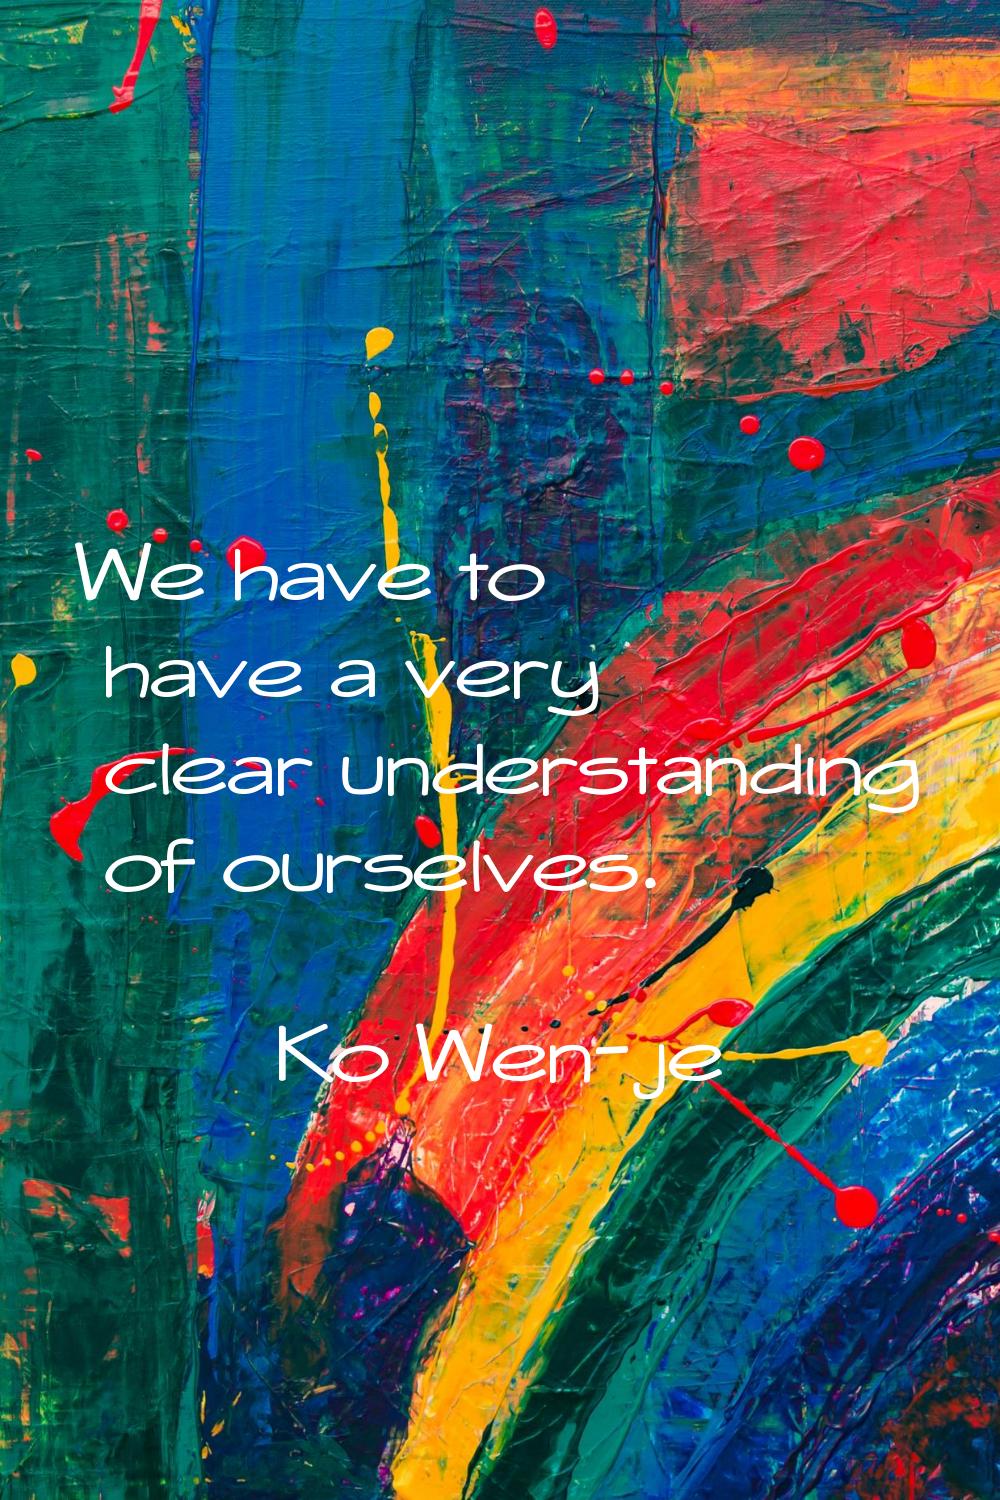 We have to have a very clear understanding of ourselves.